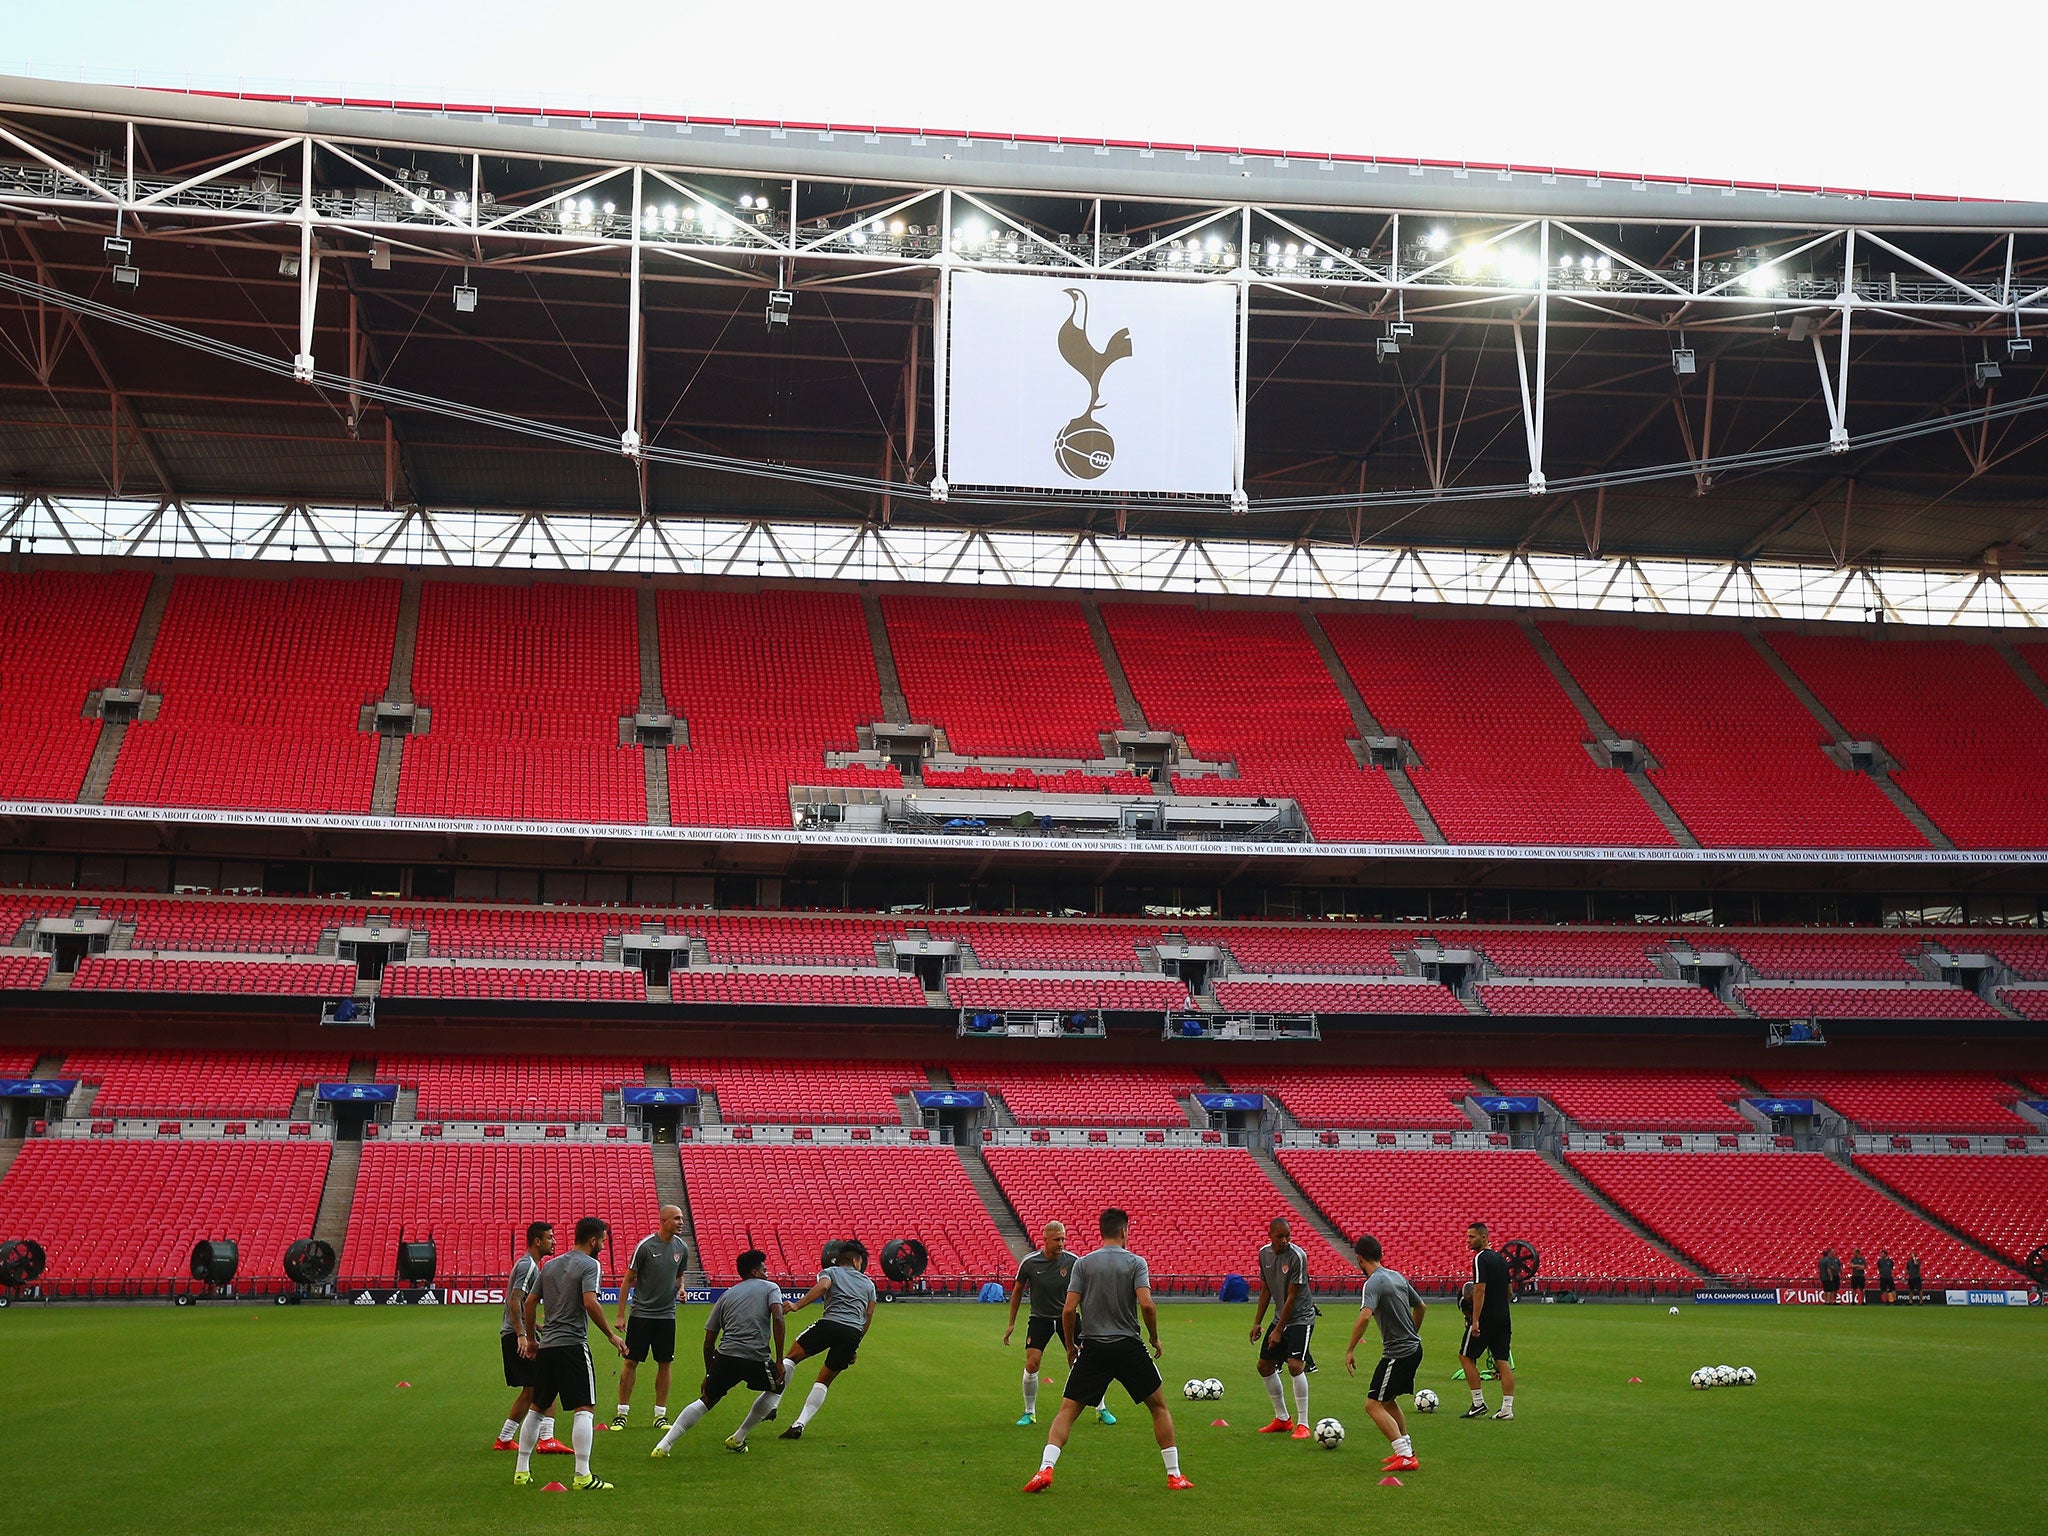 Tottenham will be playing in front of a sold out Wembley audience